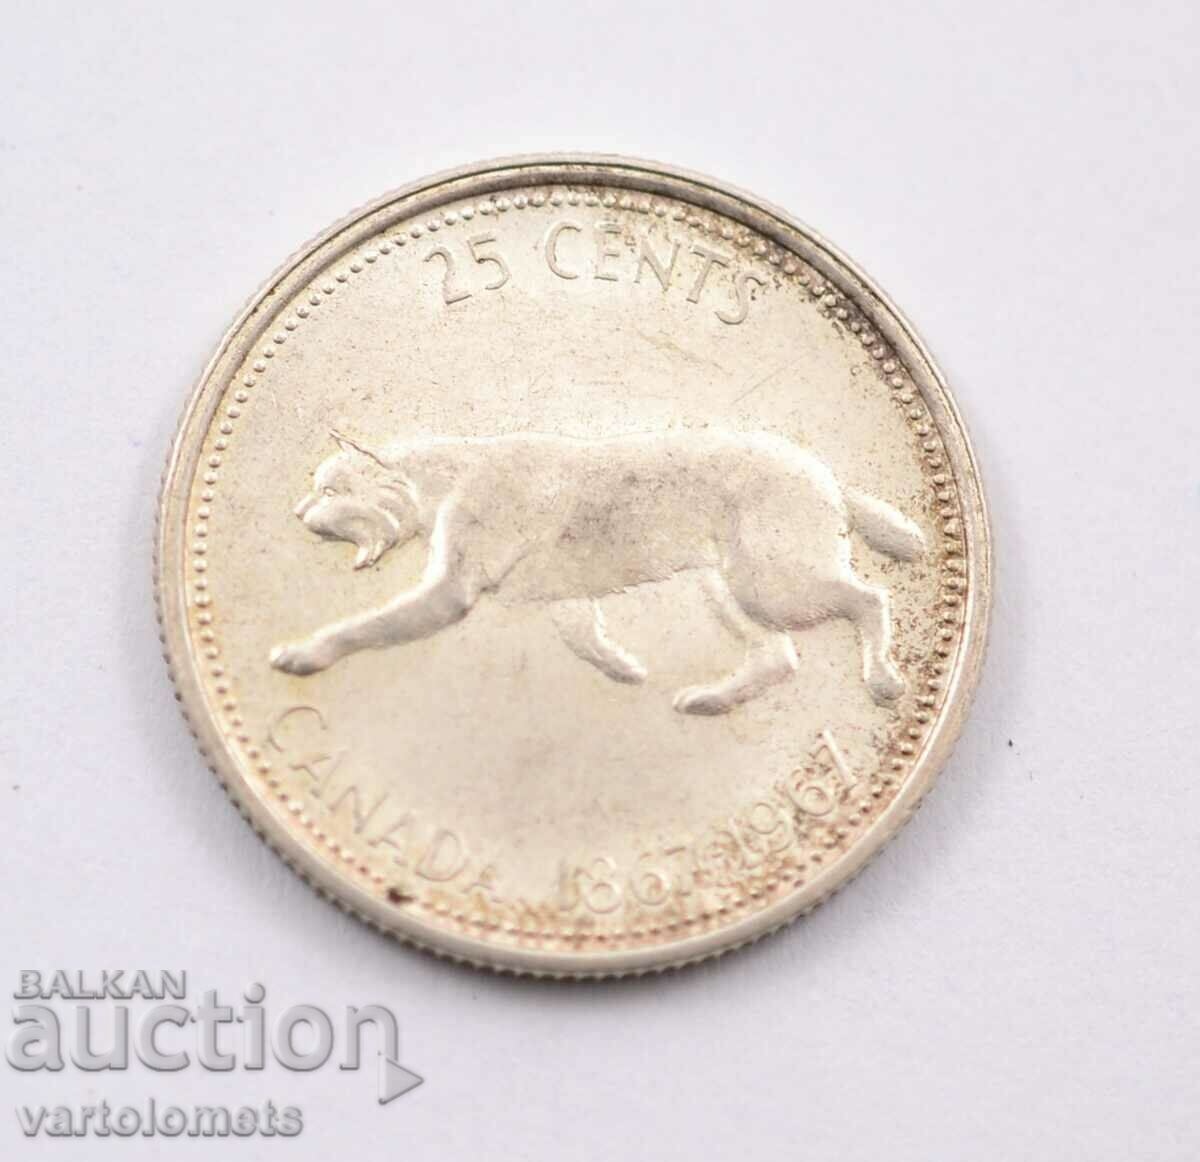 25 cents, 1967 - Canada, Silver 0.800, 5.83 gr., ø23.88 mm